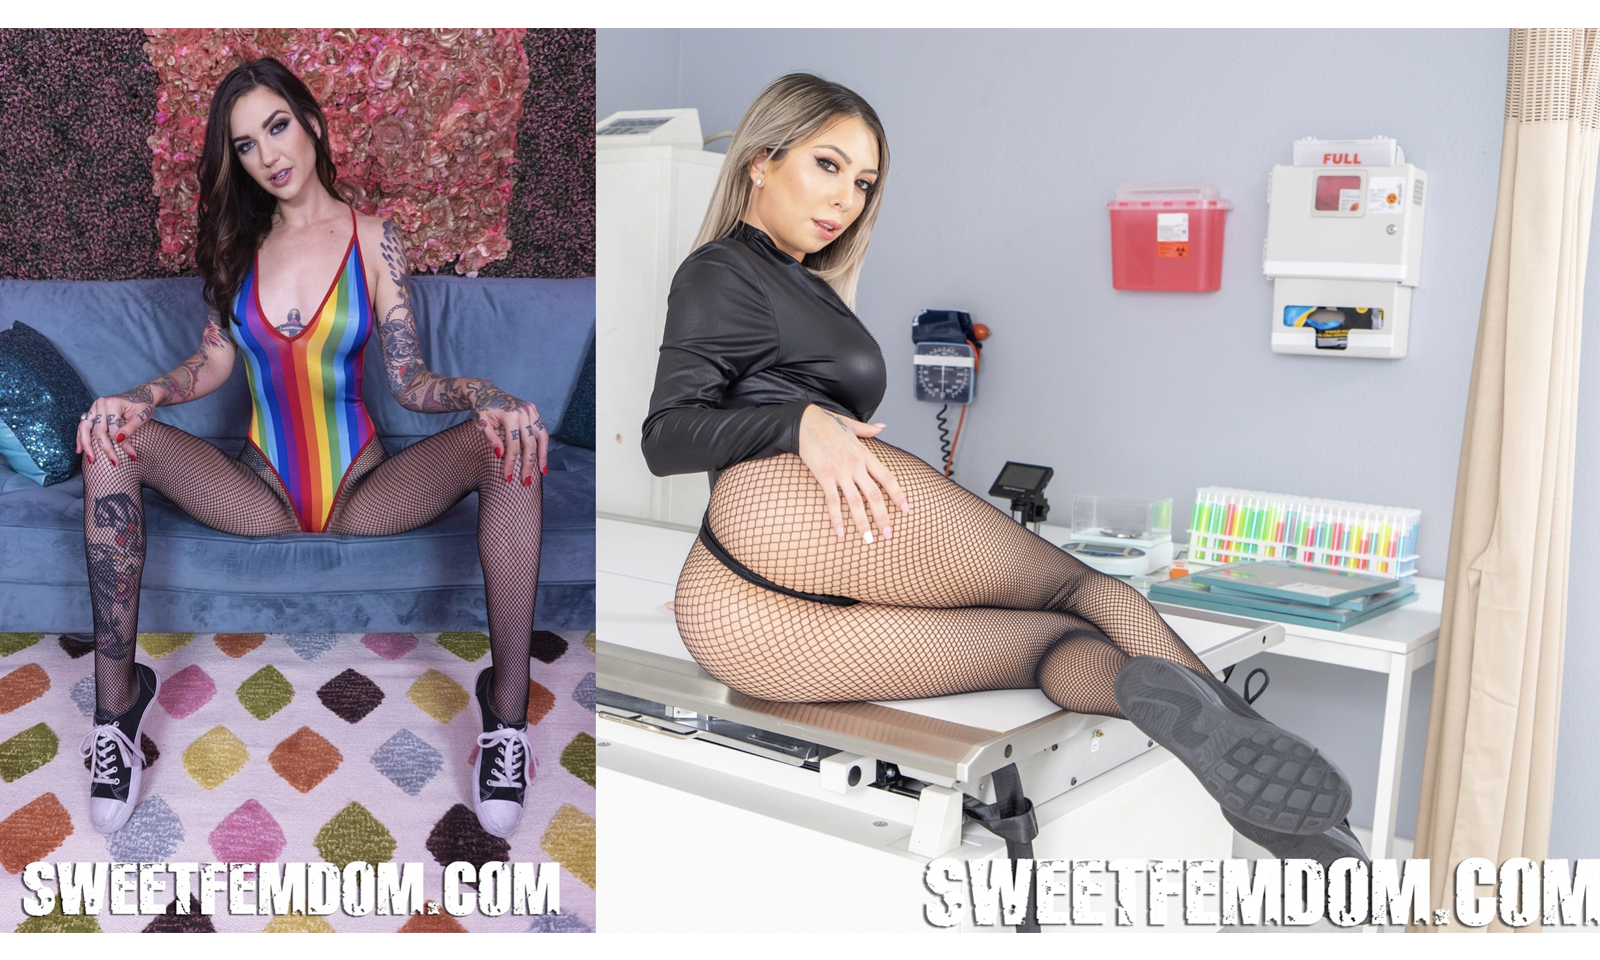 Kat Dior, Bunny Colby, Rocky Emerson Back at Sweet Femdom